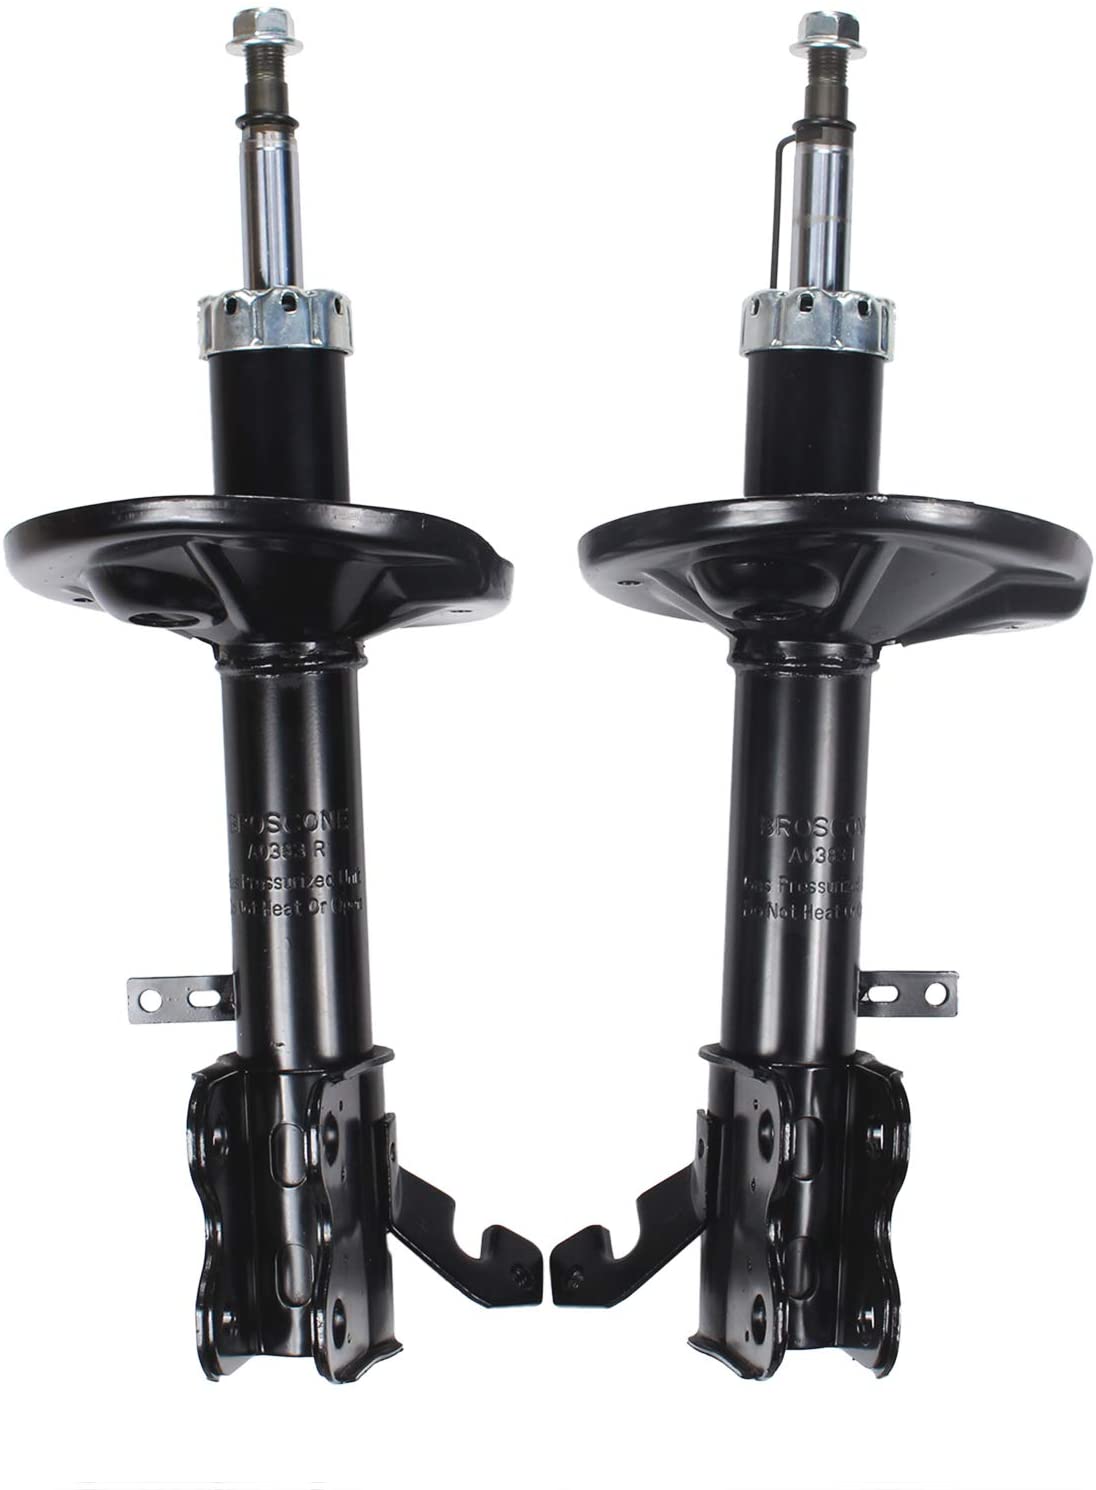 YHA 2pcs Front Gas Suspension Struts Absorber Shock Complete Assembly Compatible with 98-02 Chevy Prizm 93-97 Geo Prizm 93-02 Corolla